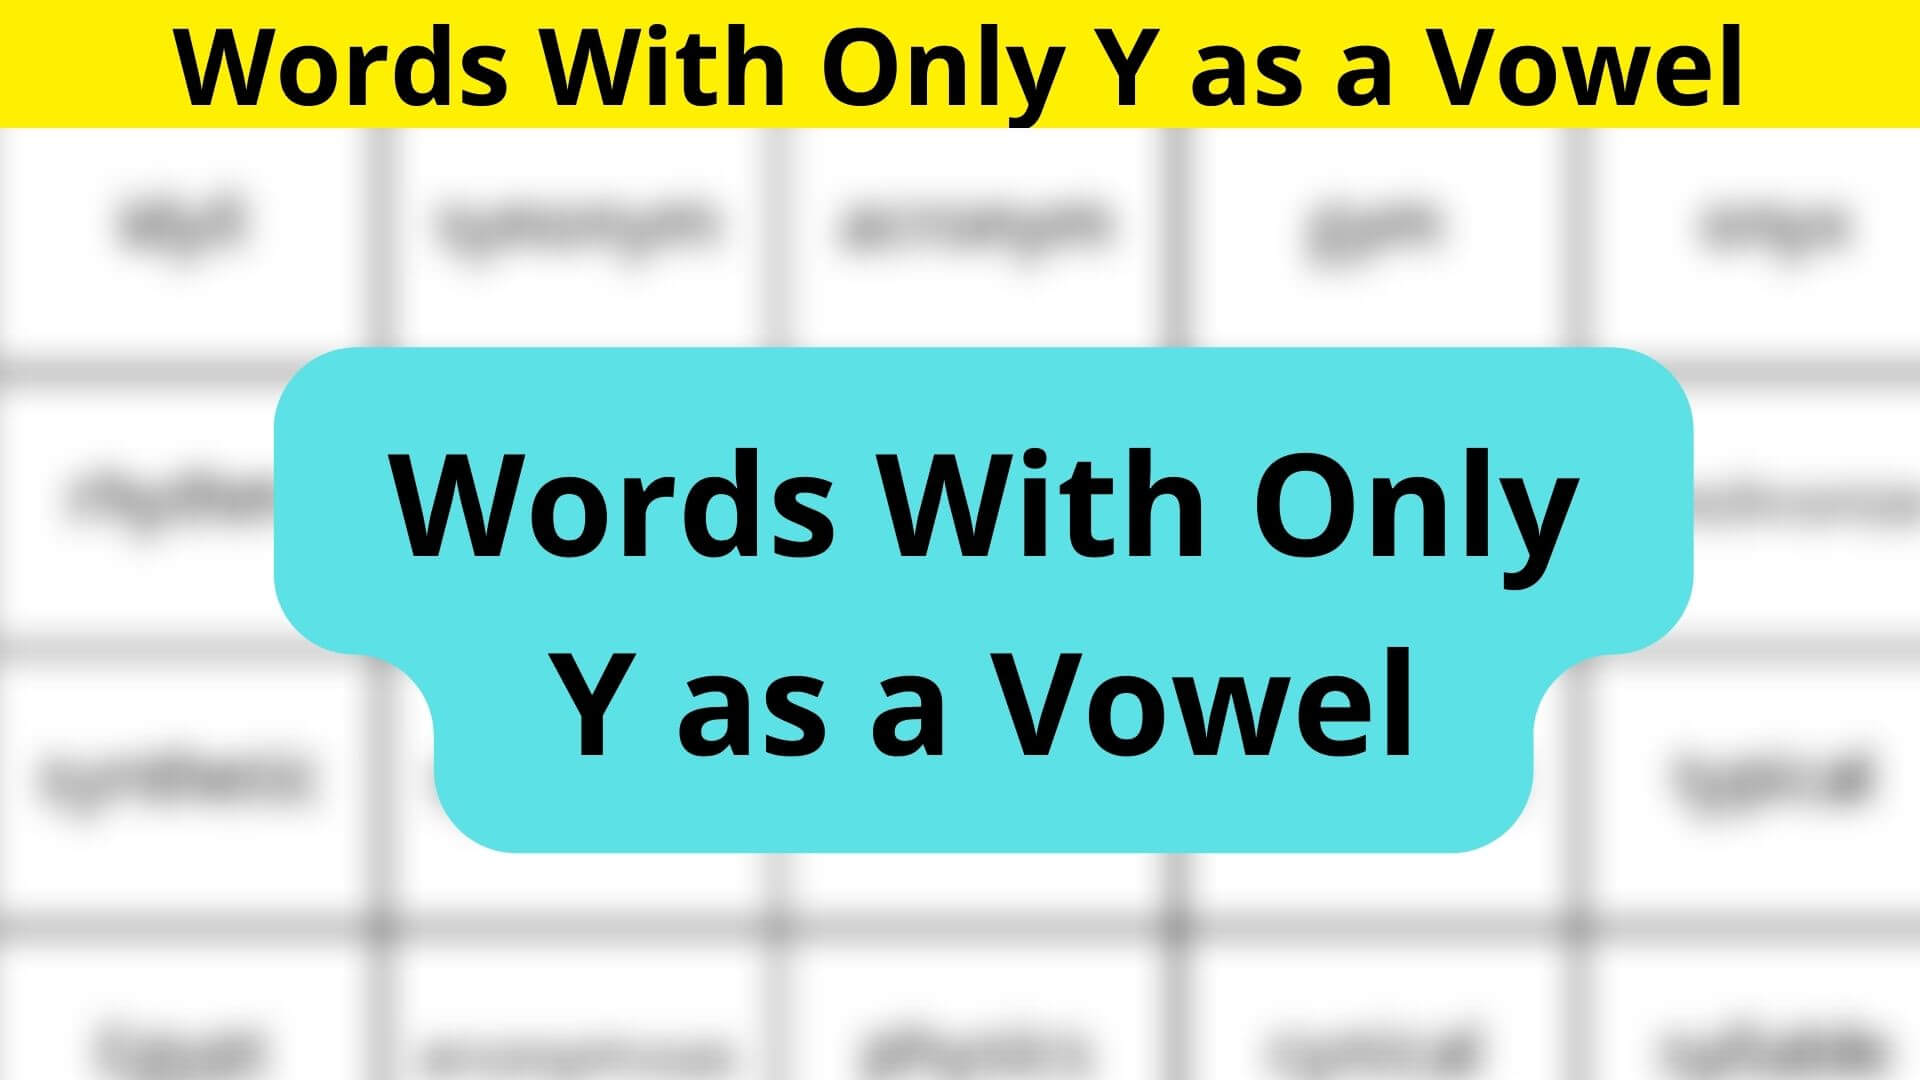 Words With Only Y as a Vowel